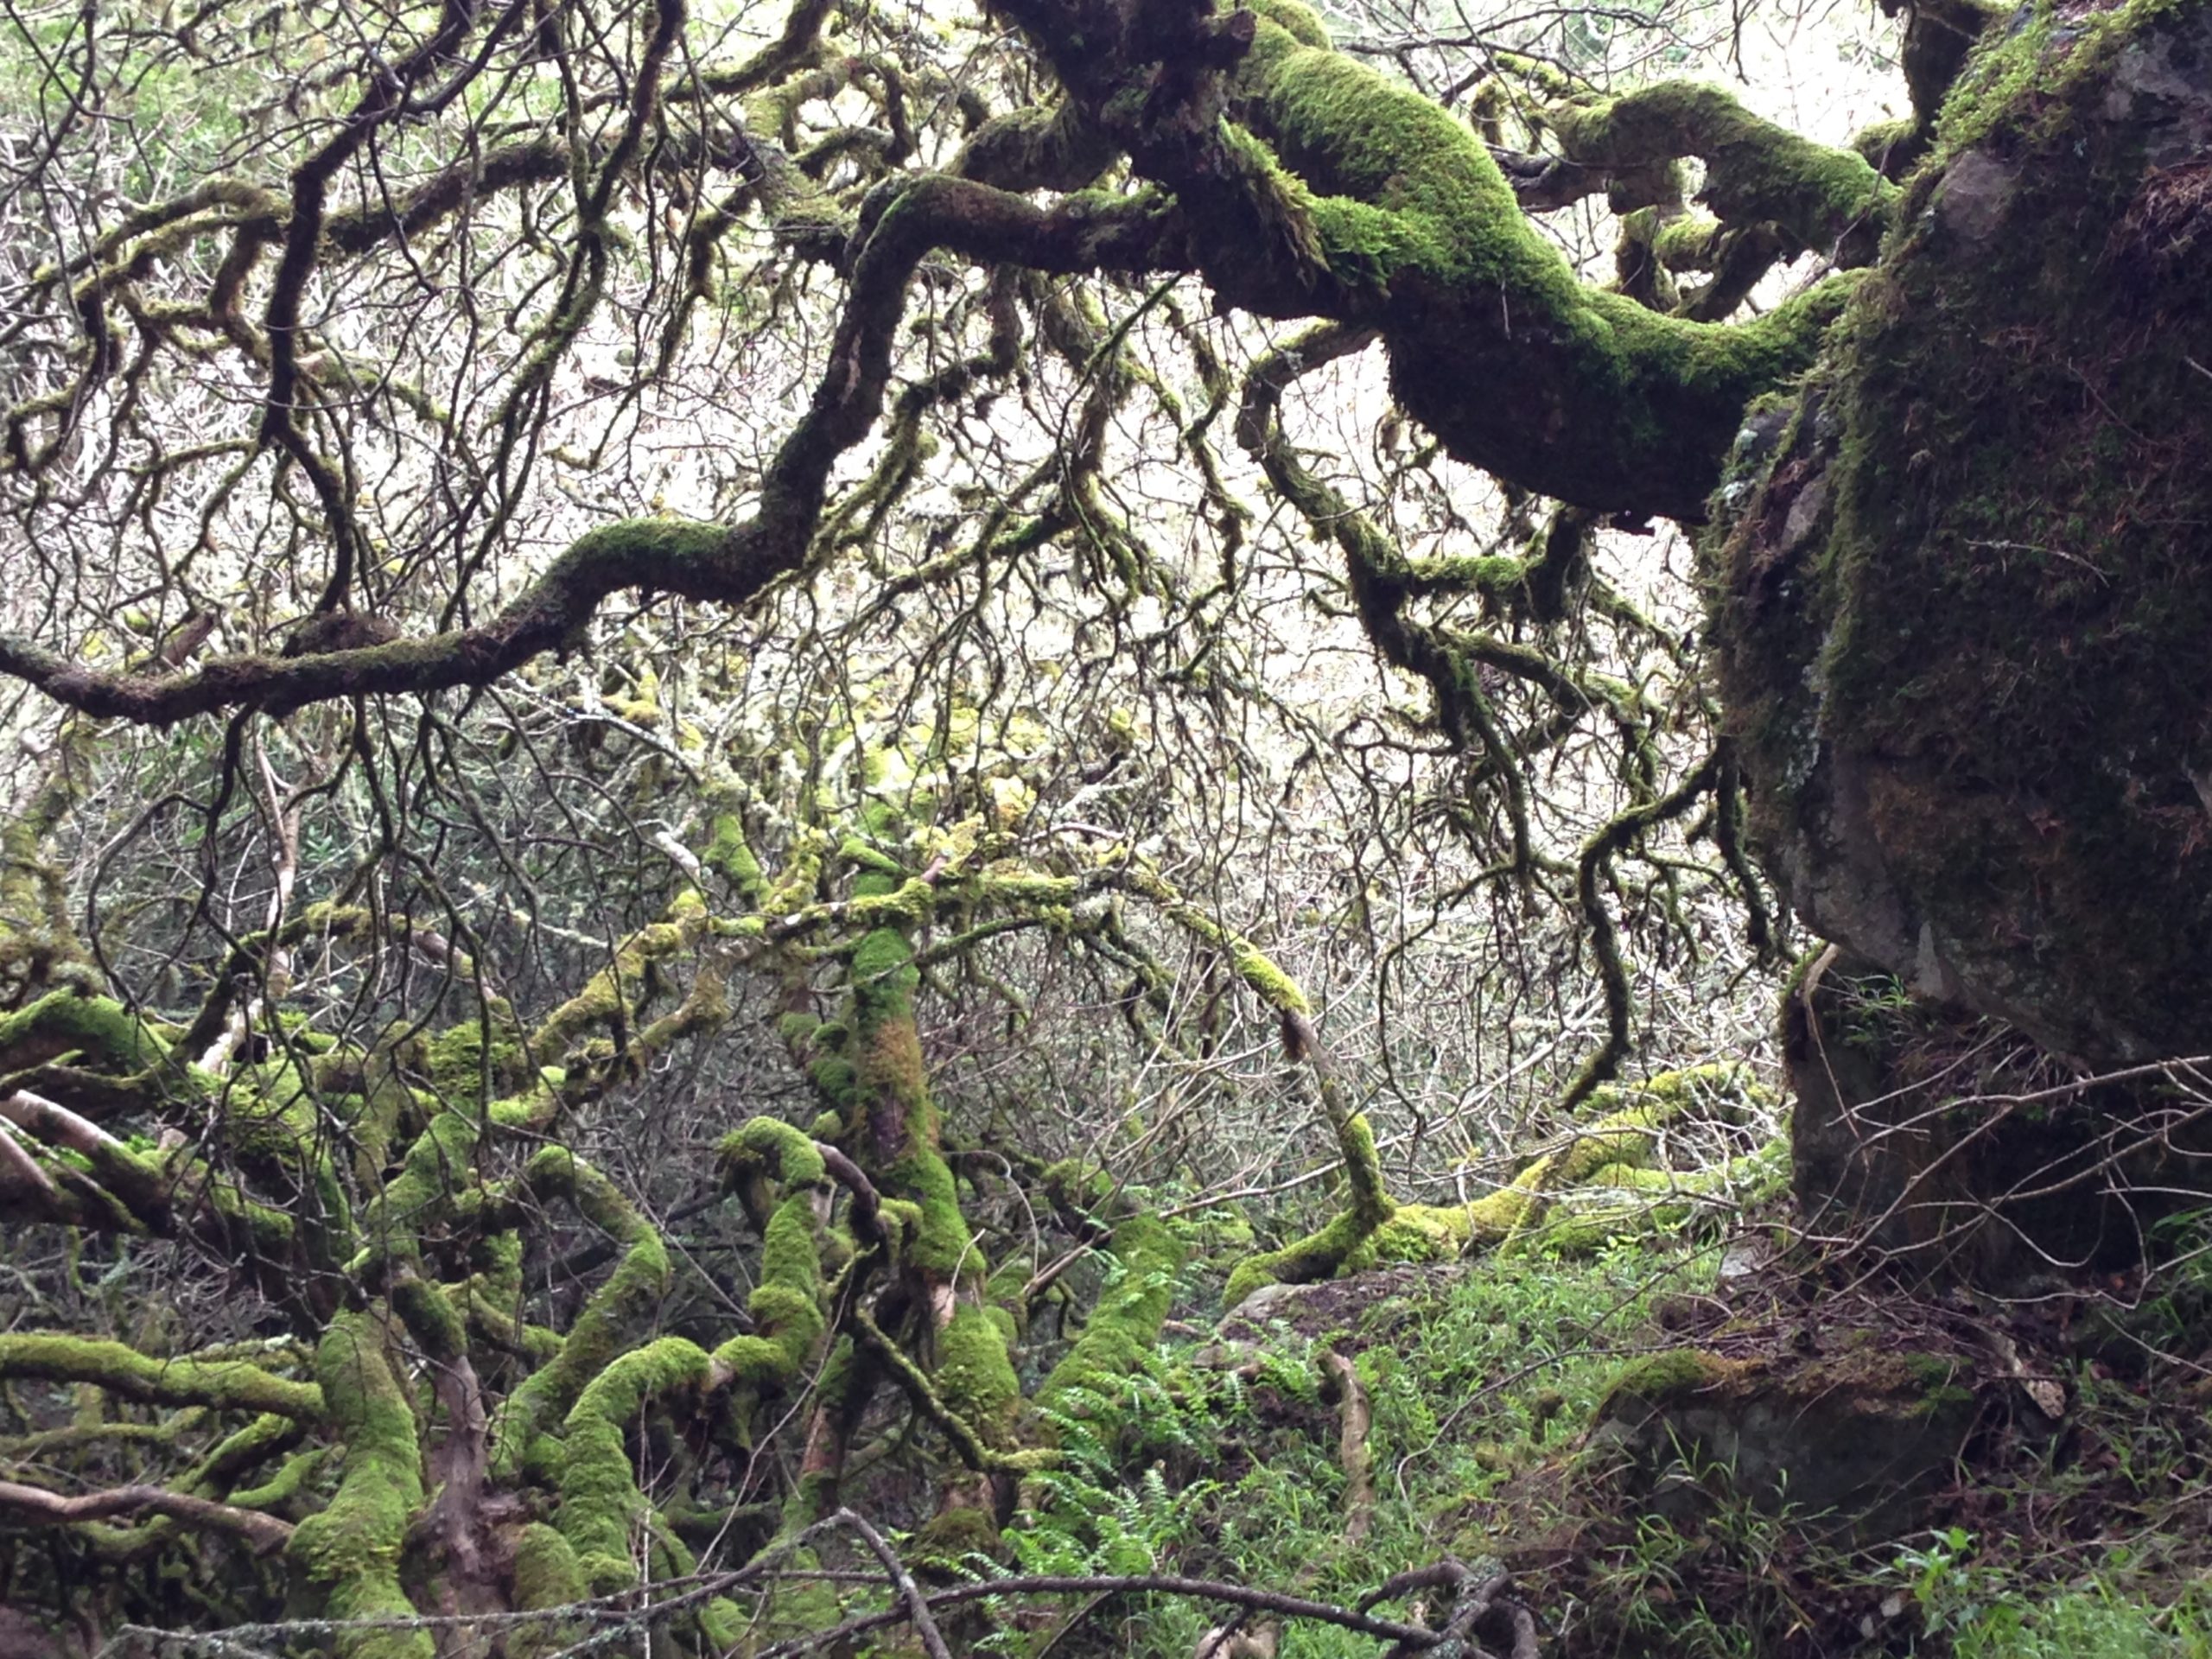 Gnarled oak tree branches at Mt Tamalpais State Park